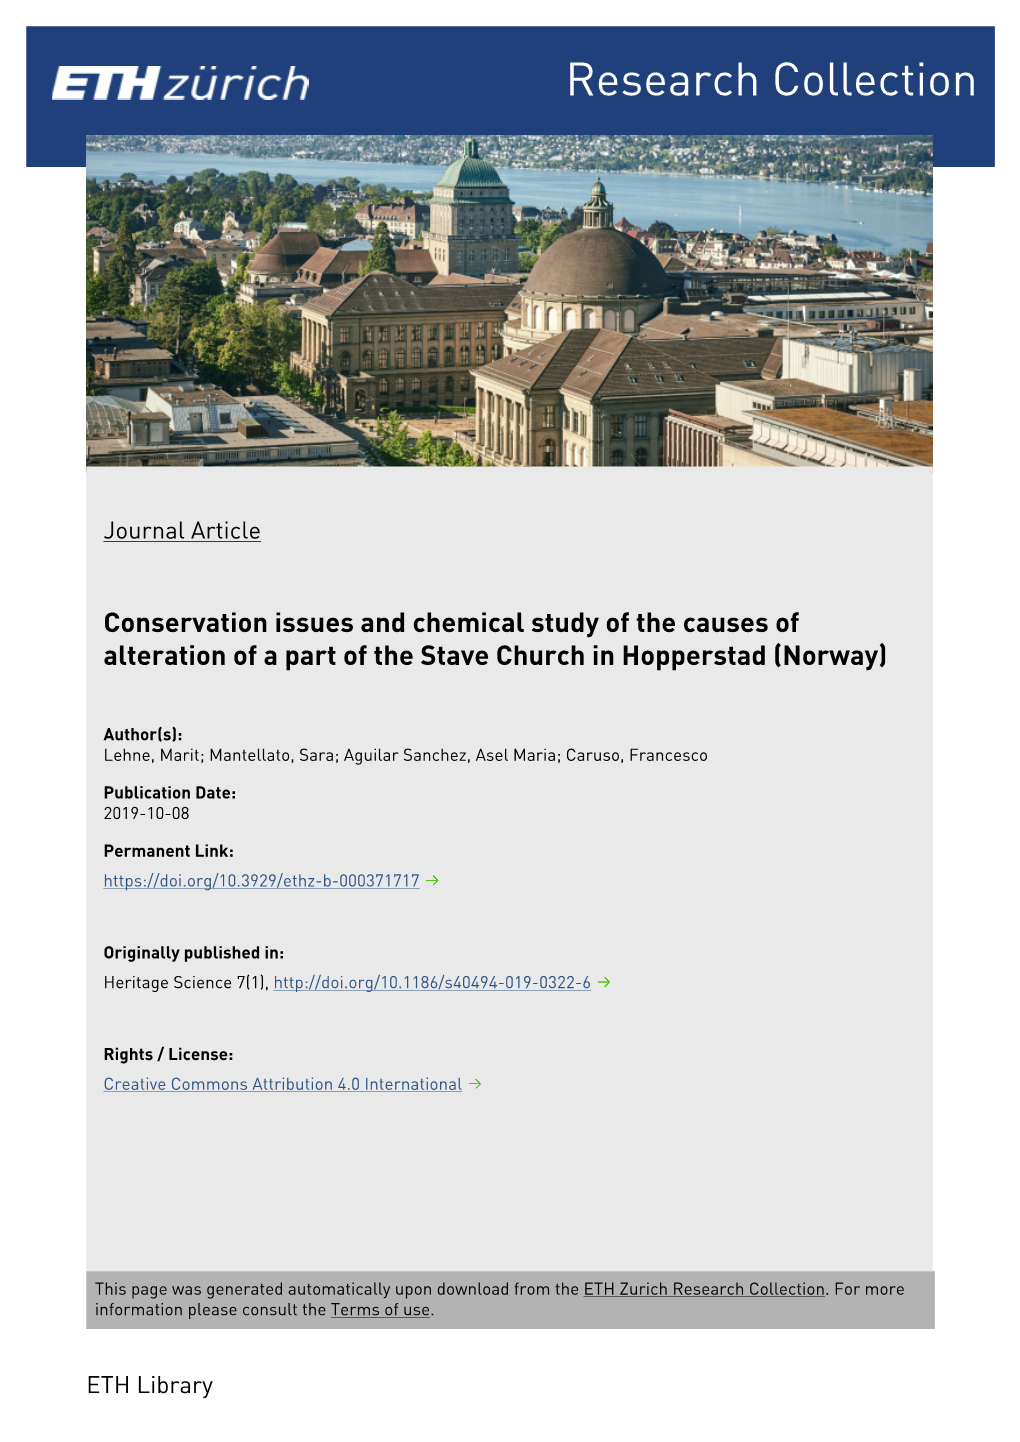 Conservation Issues and Chemical Study of the Causes of Alteration of a Part of the Stave Church in Hopperstad (Norway)